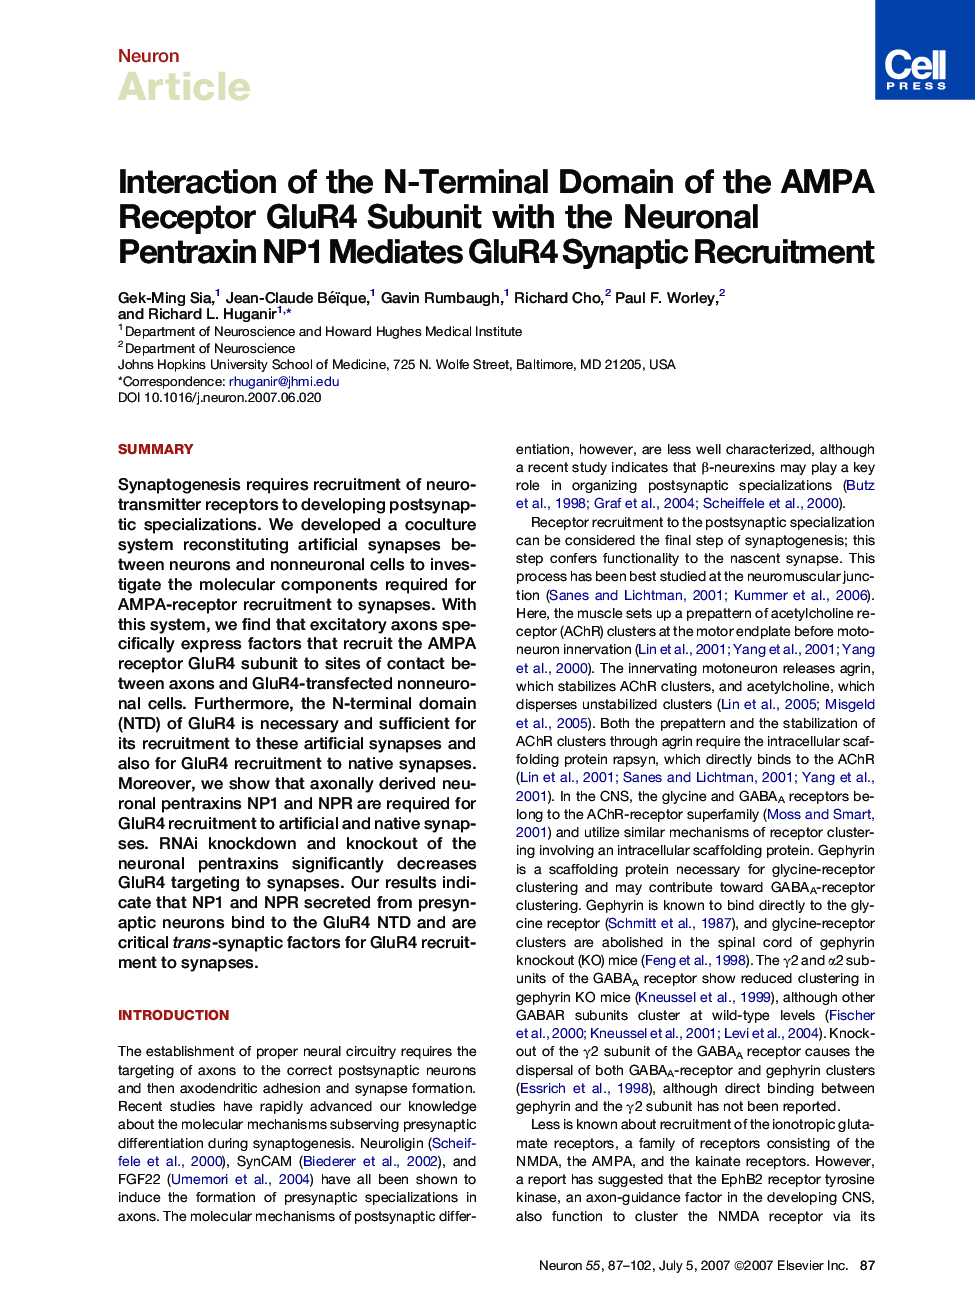 Interaction of the N-Terminal Domain of the AMPA Receptor GluR4 Subunit with the Neuronal Pentraxin NP1 Mediates GluR4 Synaptic Recruitment